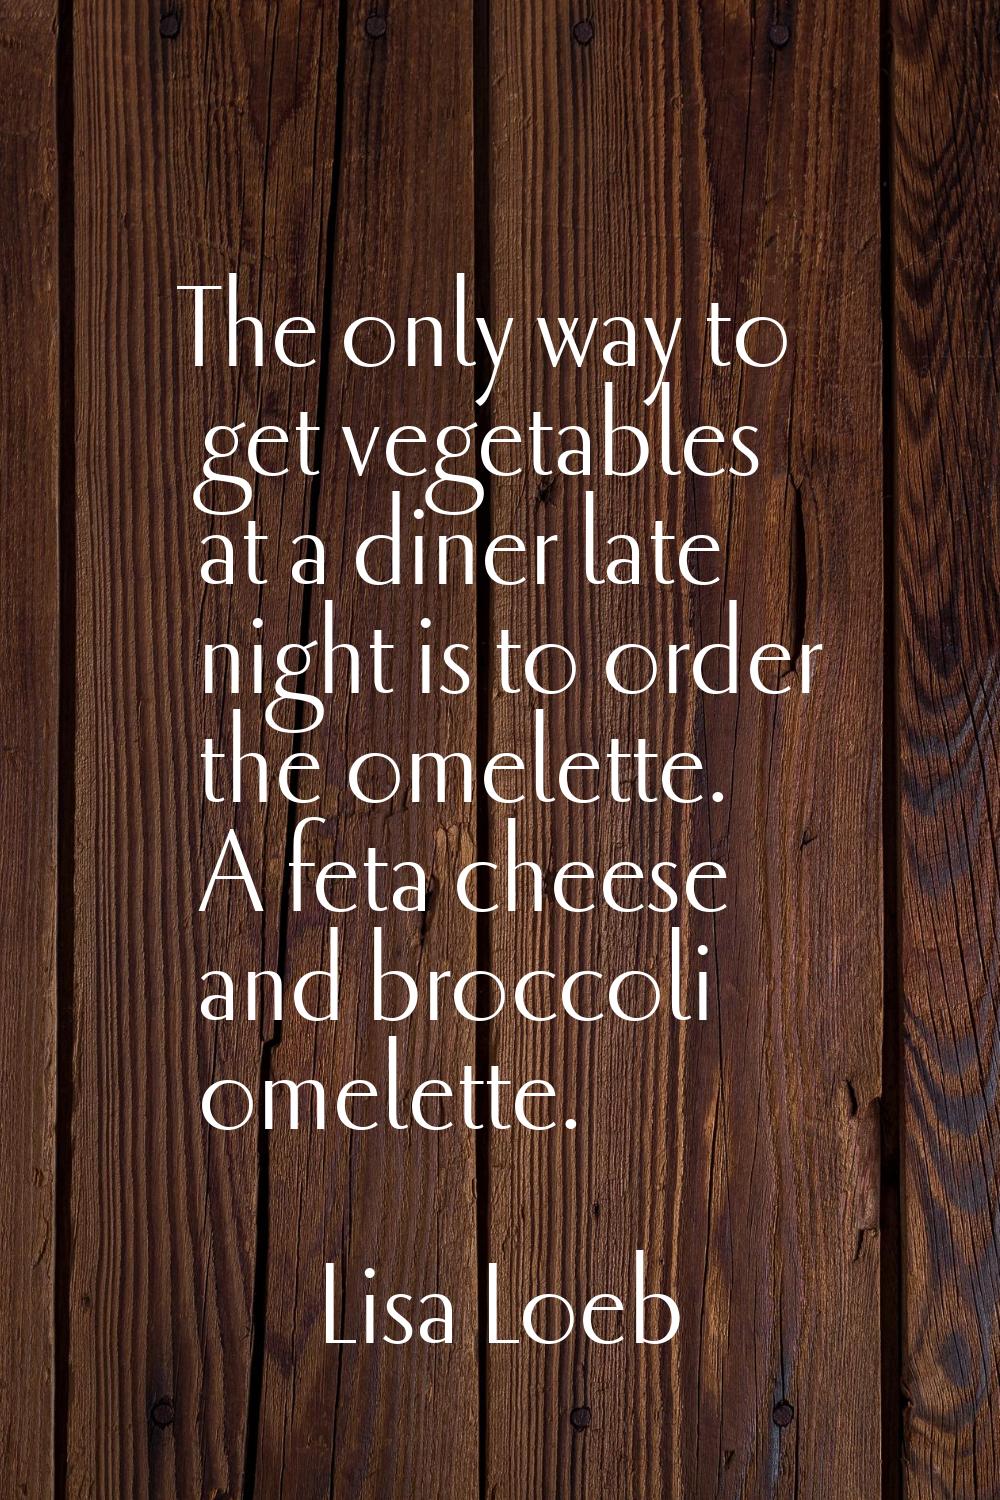 The only way to get vegetables at a diner late night is to order the omelette. A feta cheese and br